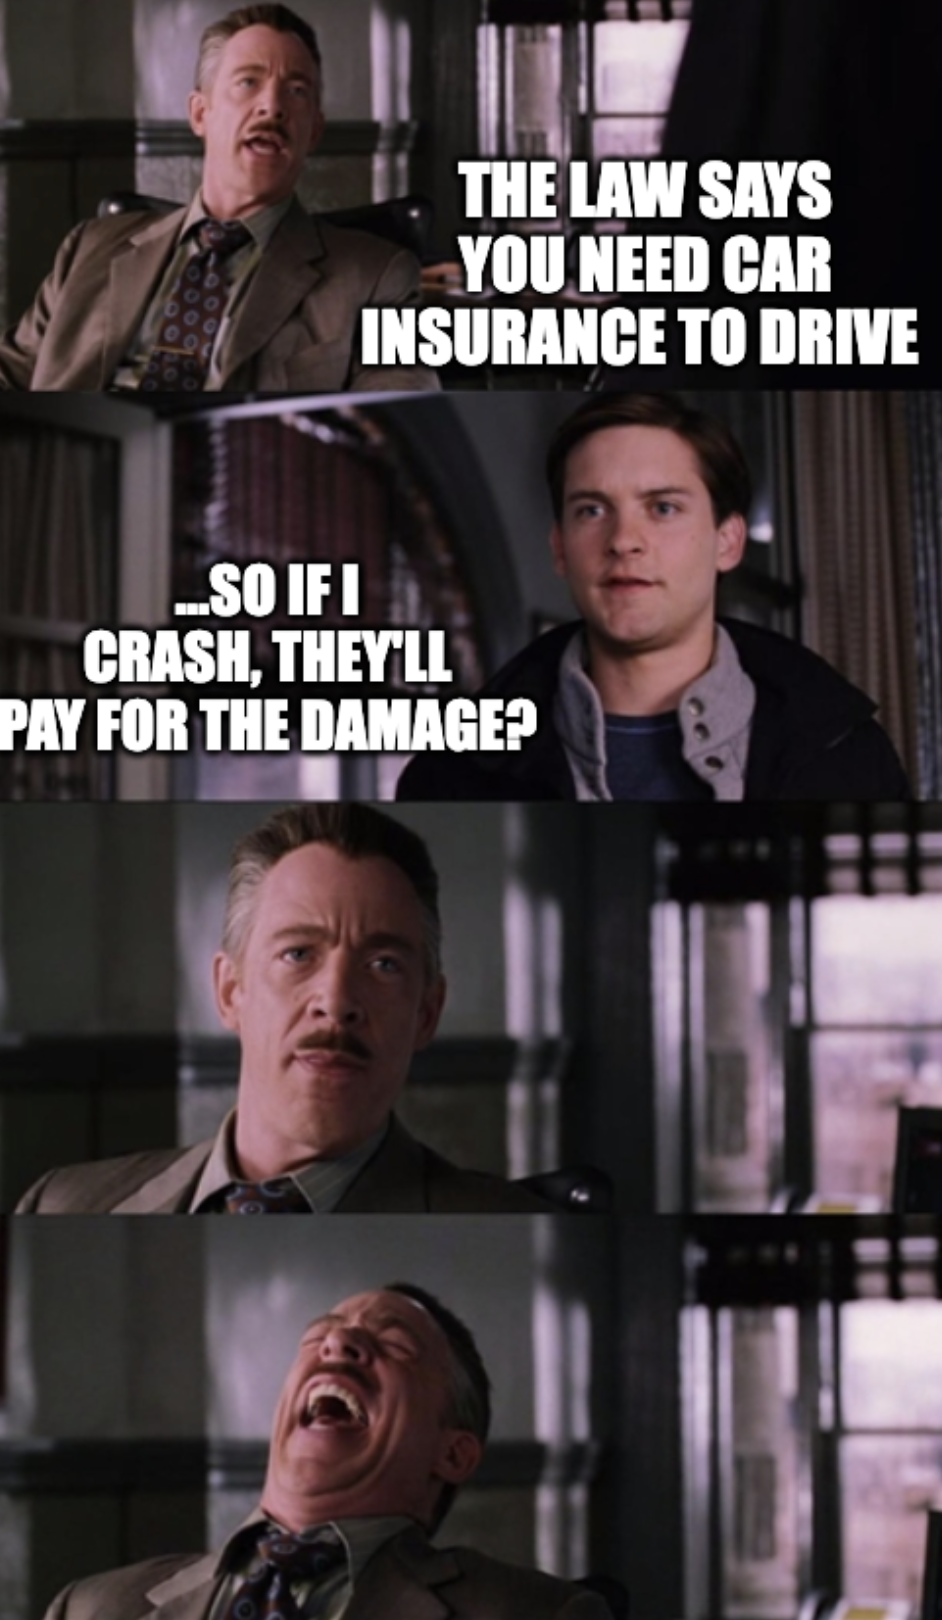 dank memes - film - The Law Says You Need Car Insurance To Drive So If I Crash, They'Ll Pay For The Damage?